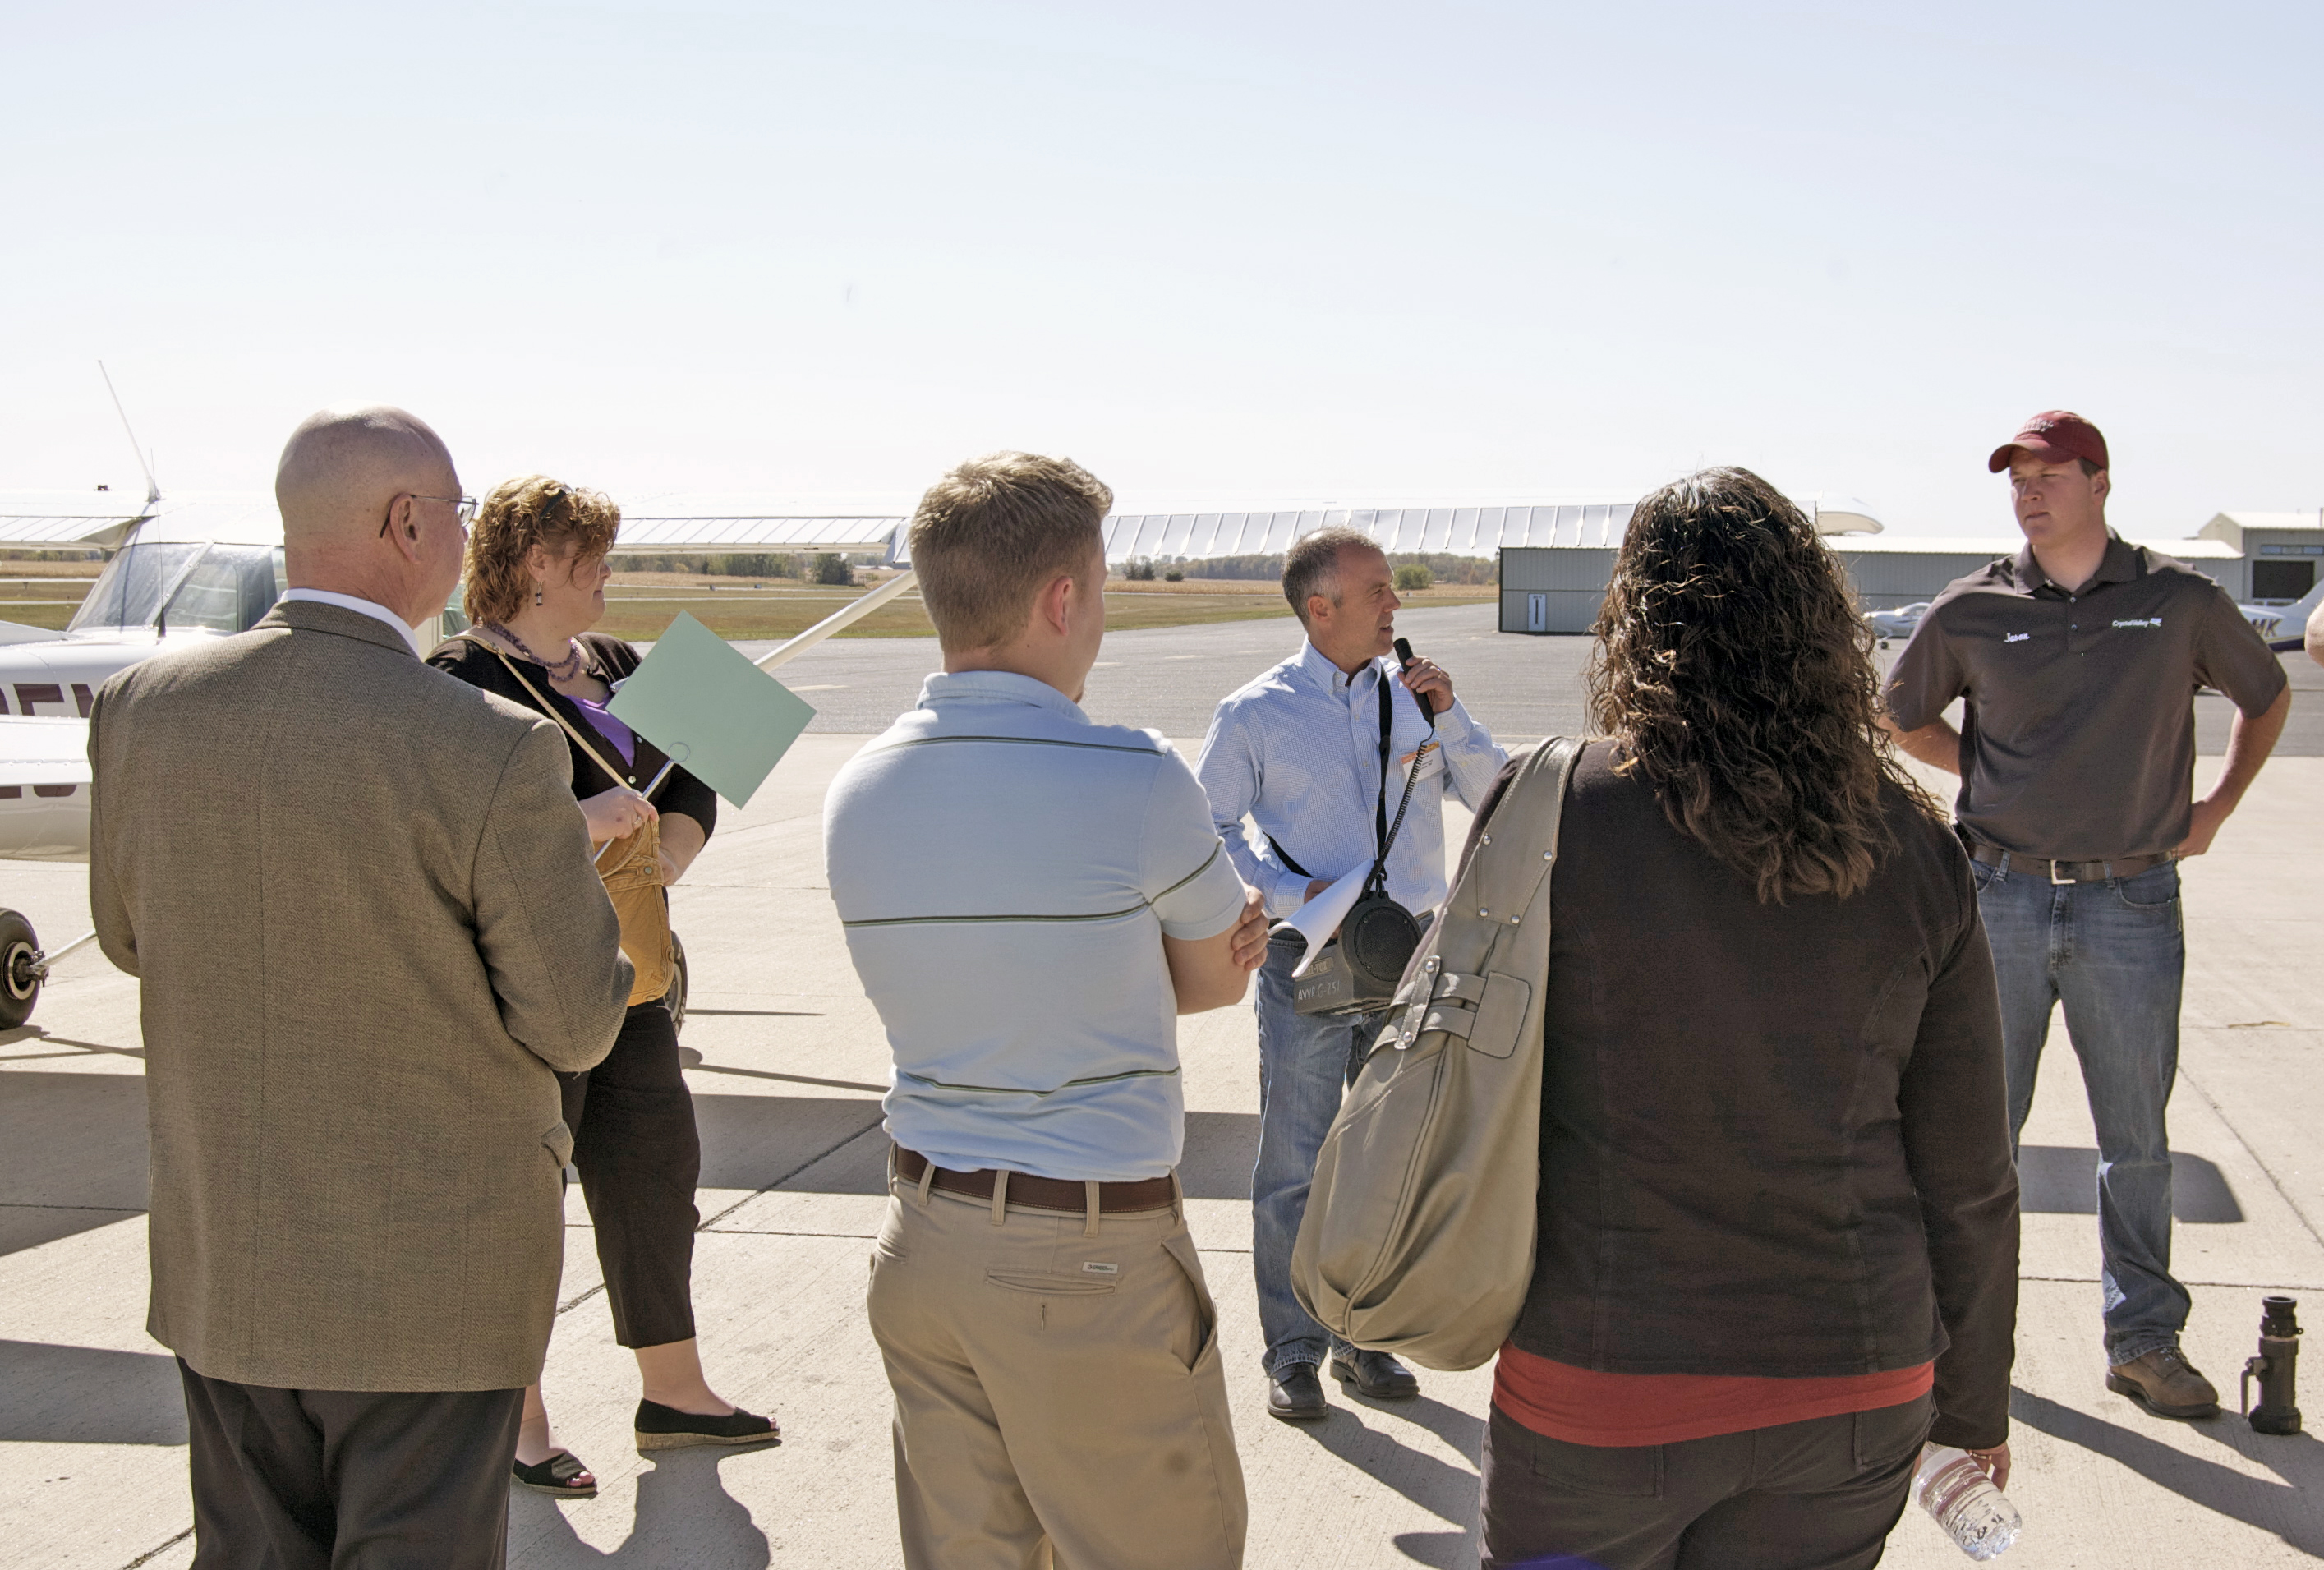 group of people outside on airport tour